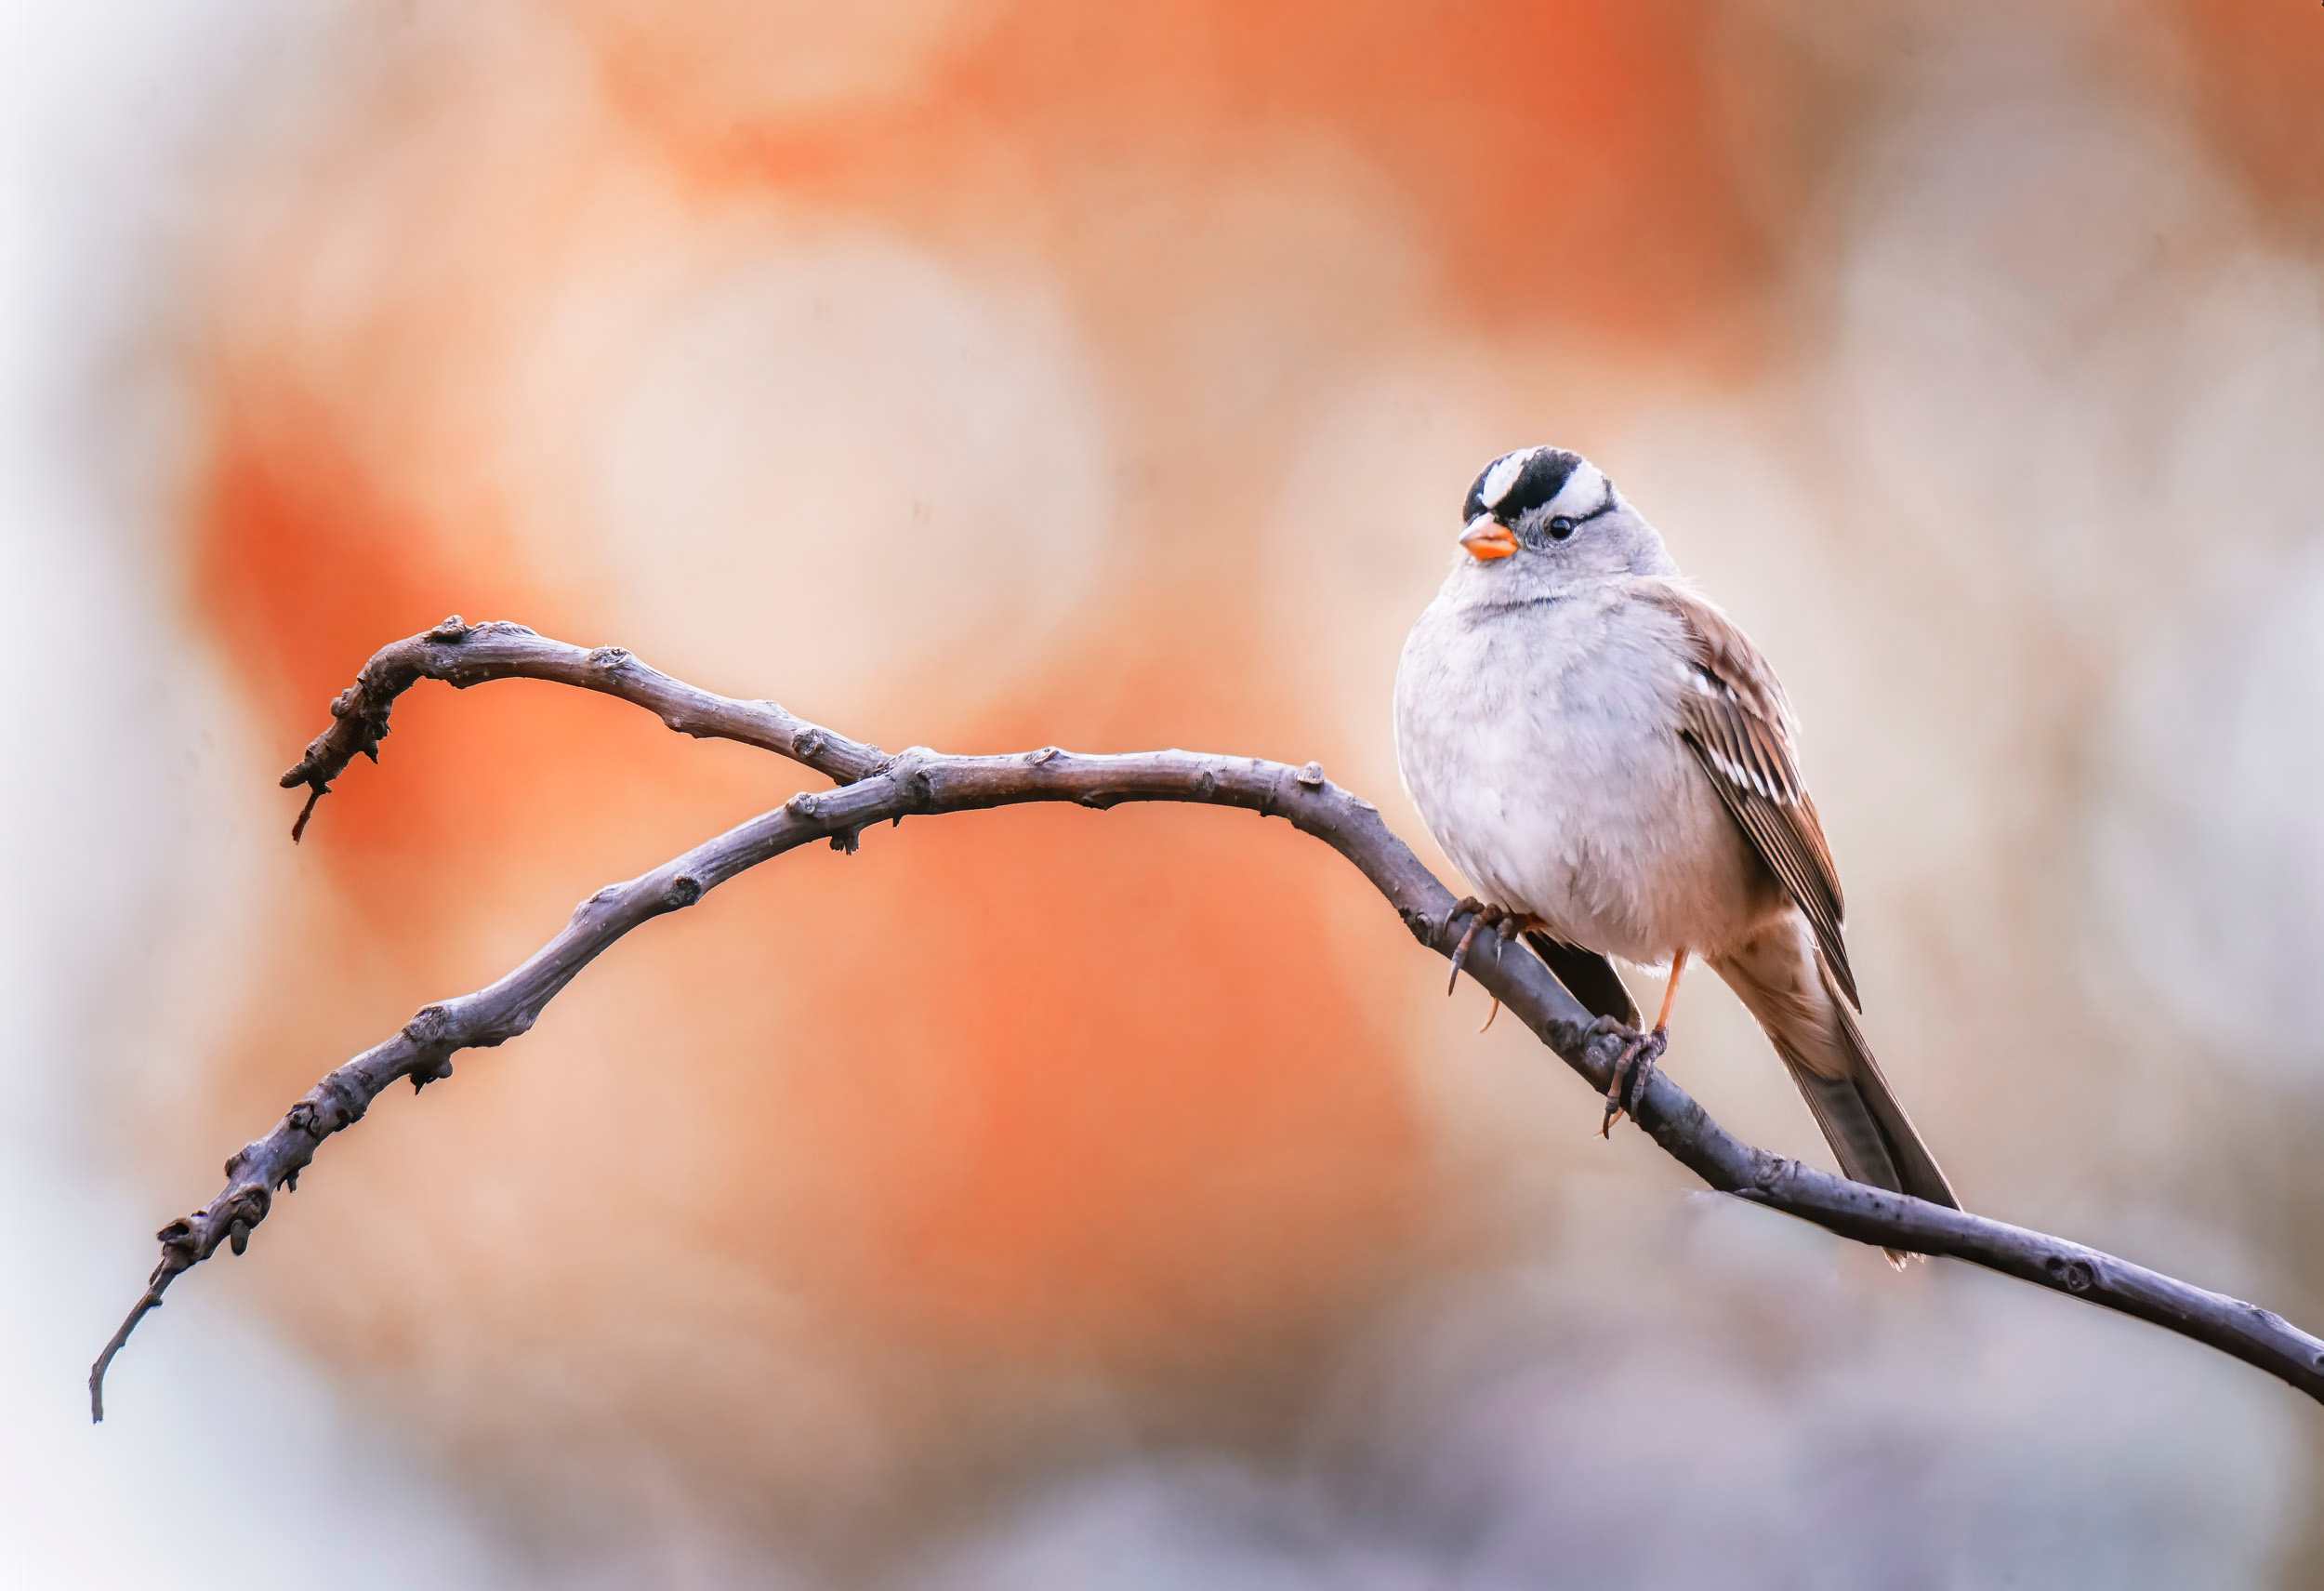 A bird with a striped head sits on a bare branch against a blurred background of orange fall foliage.